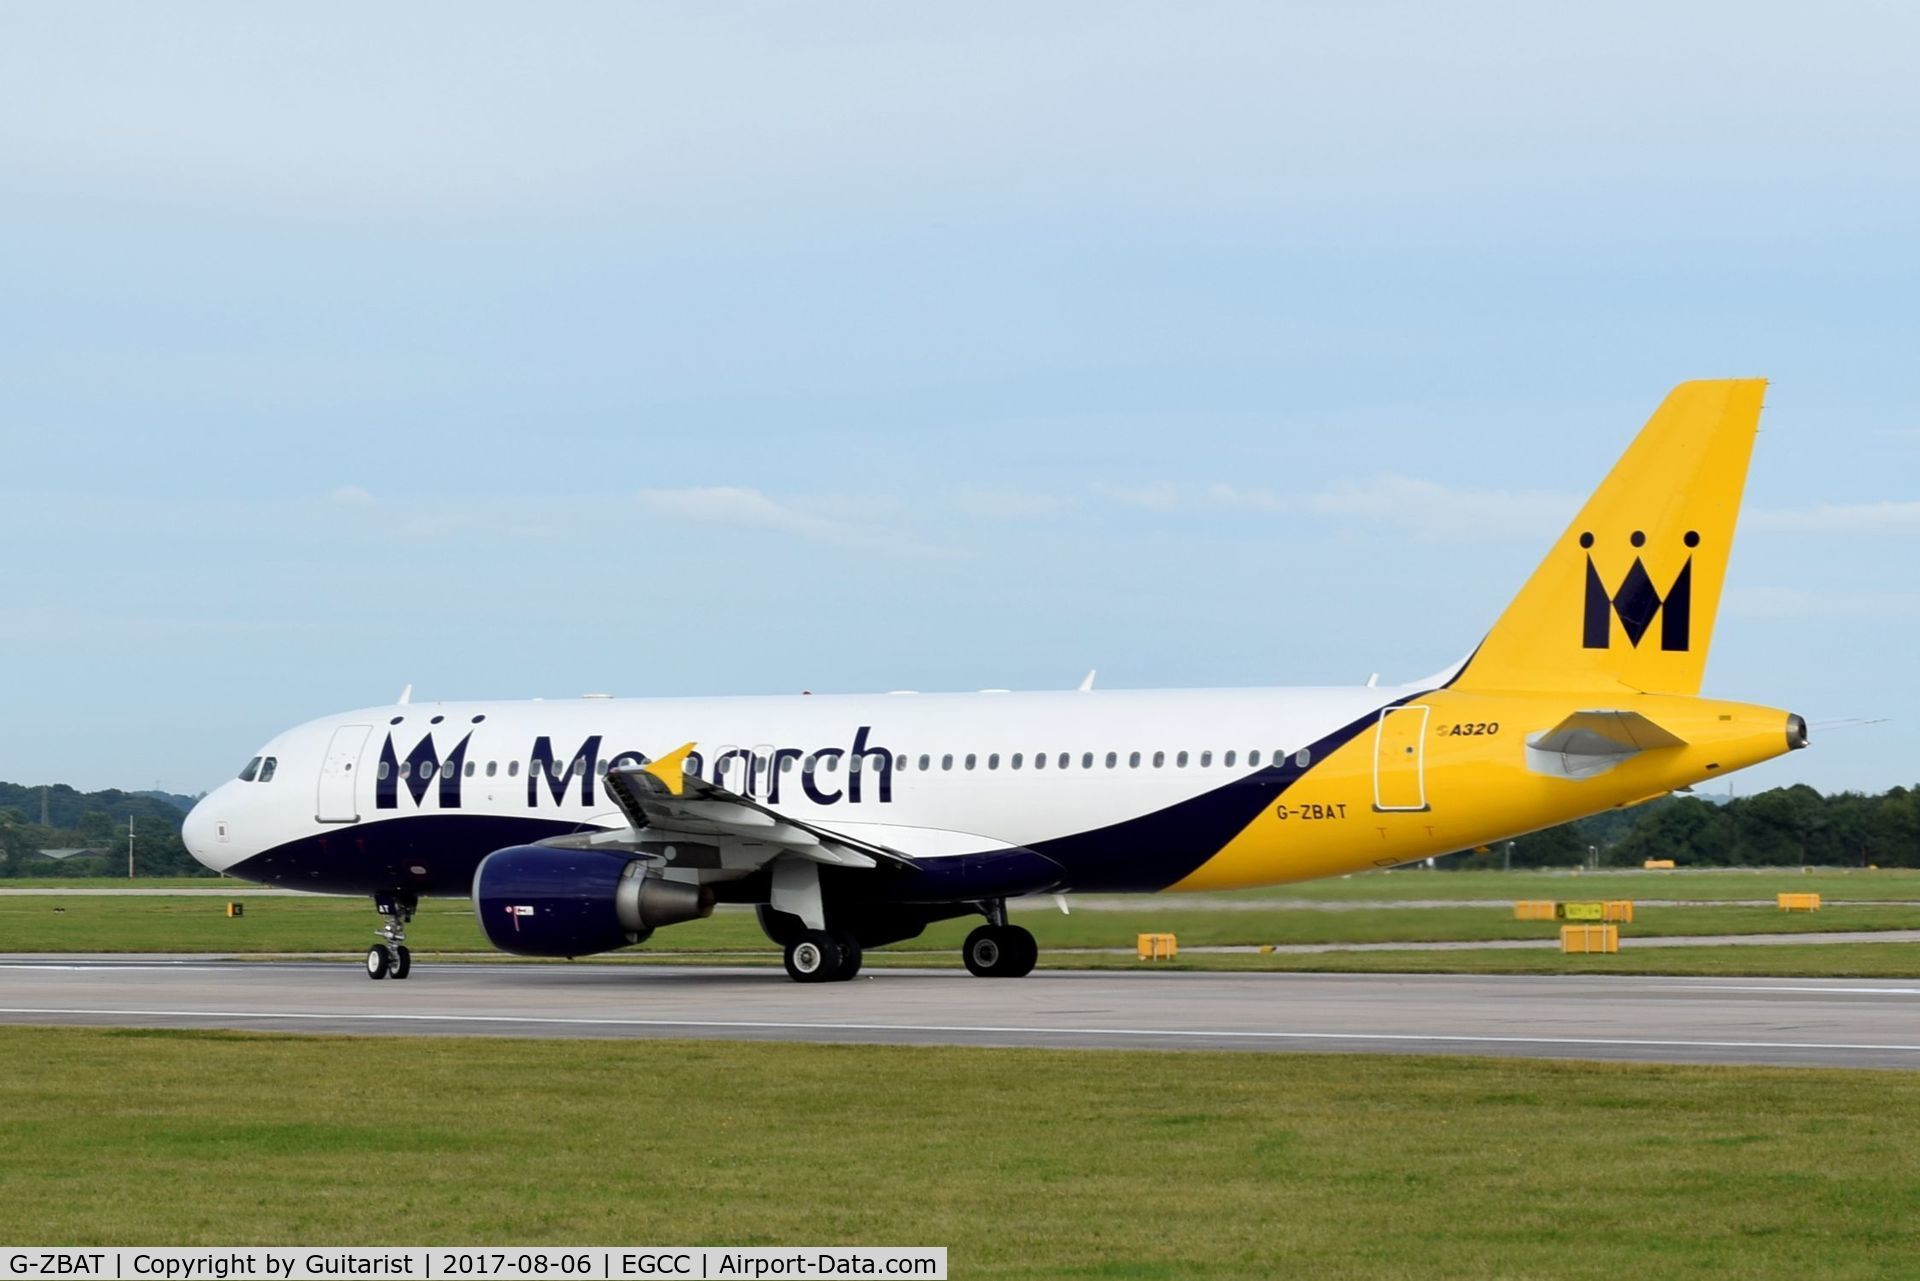 G-ZBAT, 2007 Airbus A320-214 C/N 3278, At Manchester